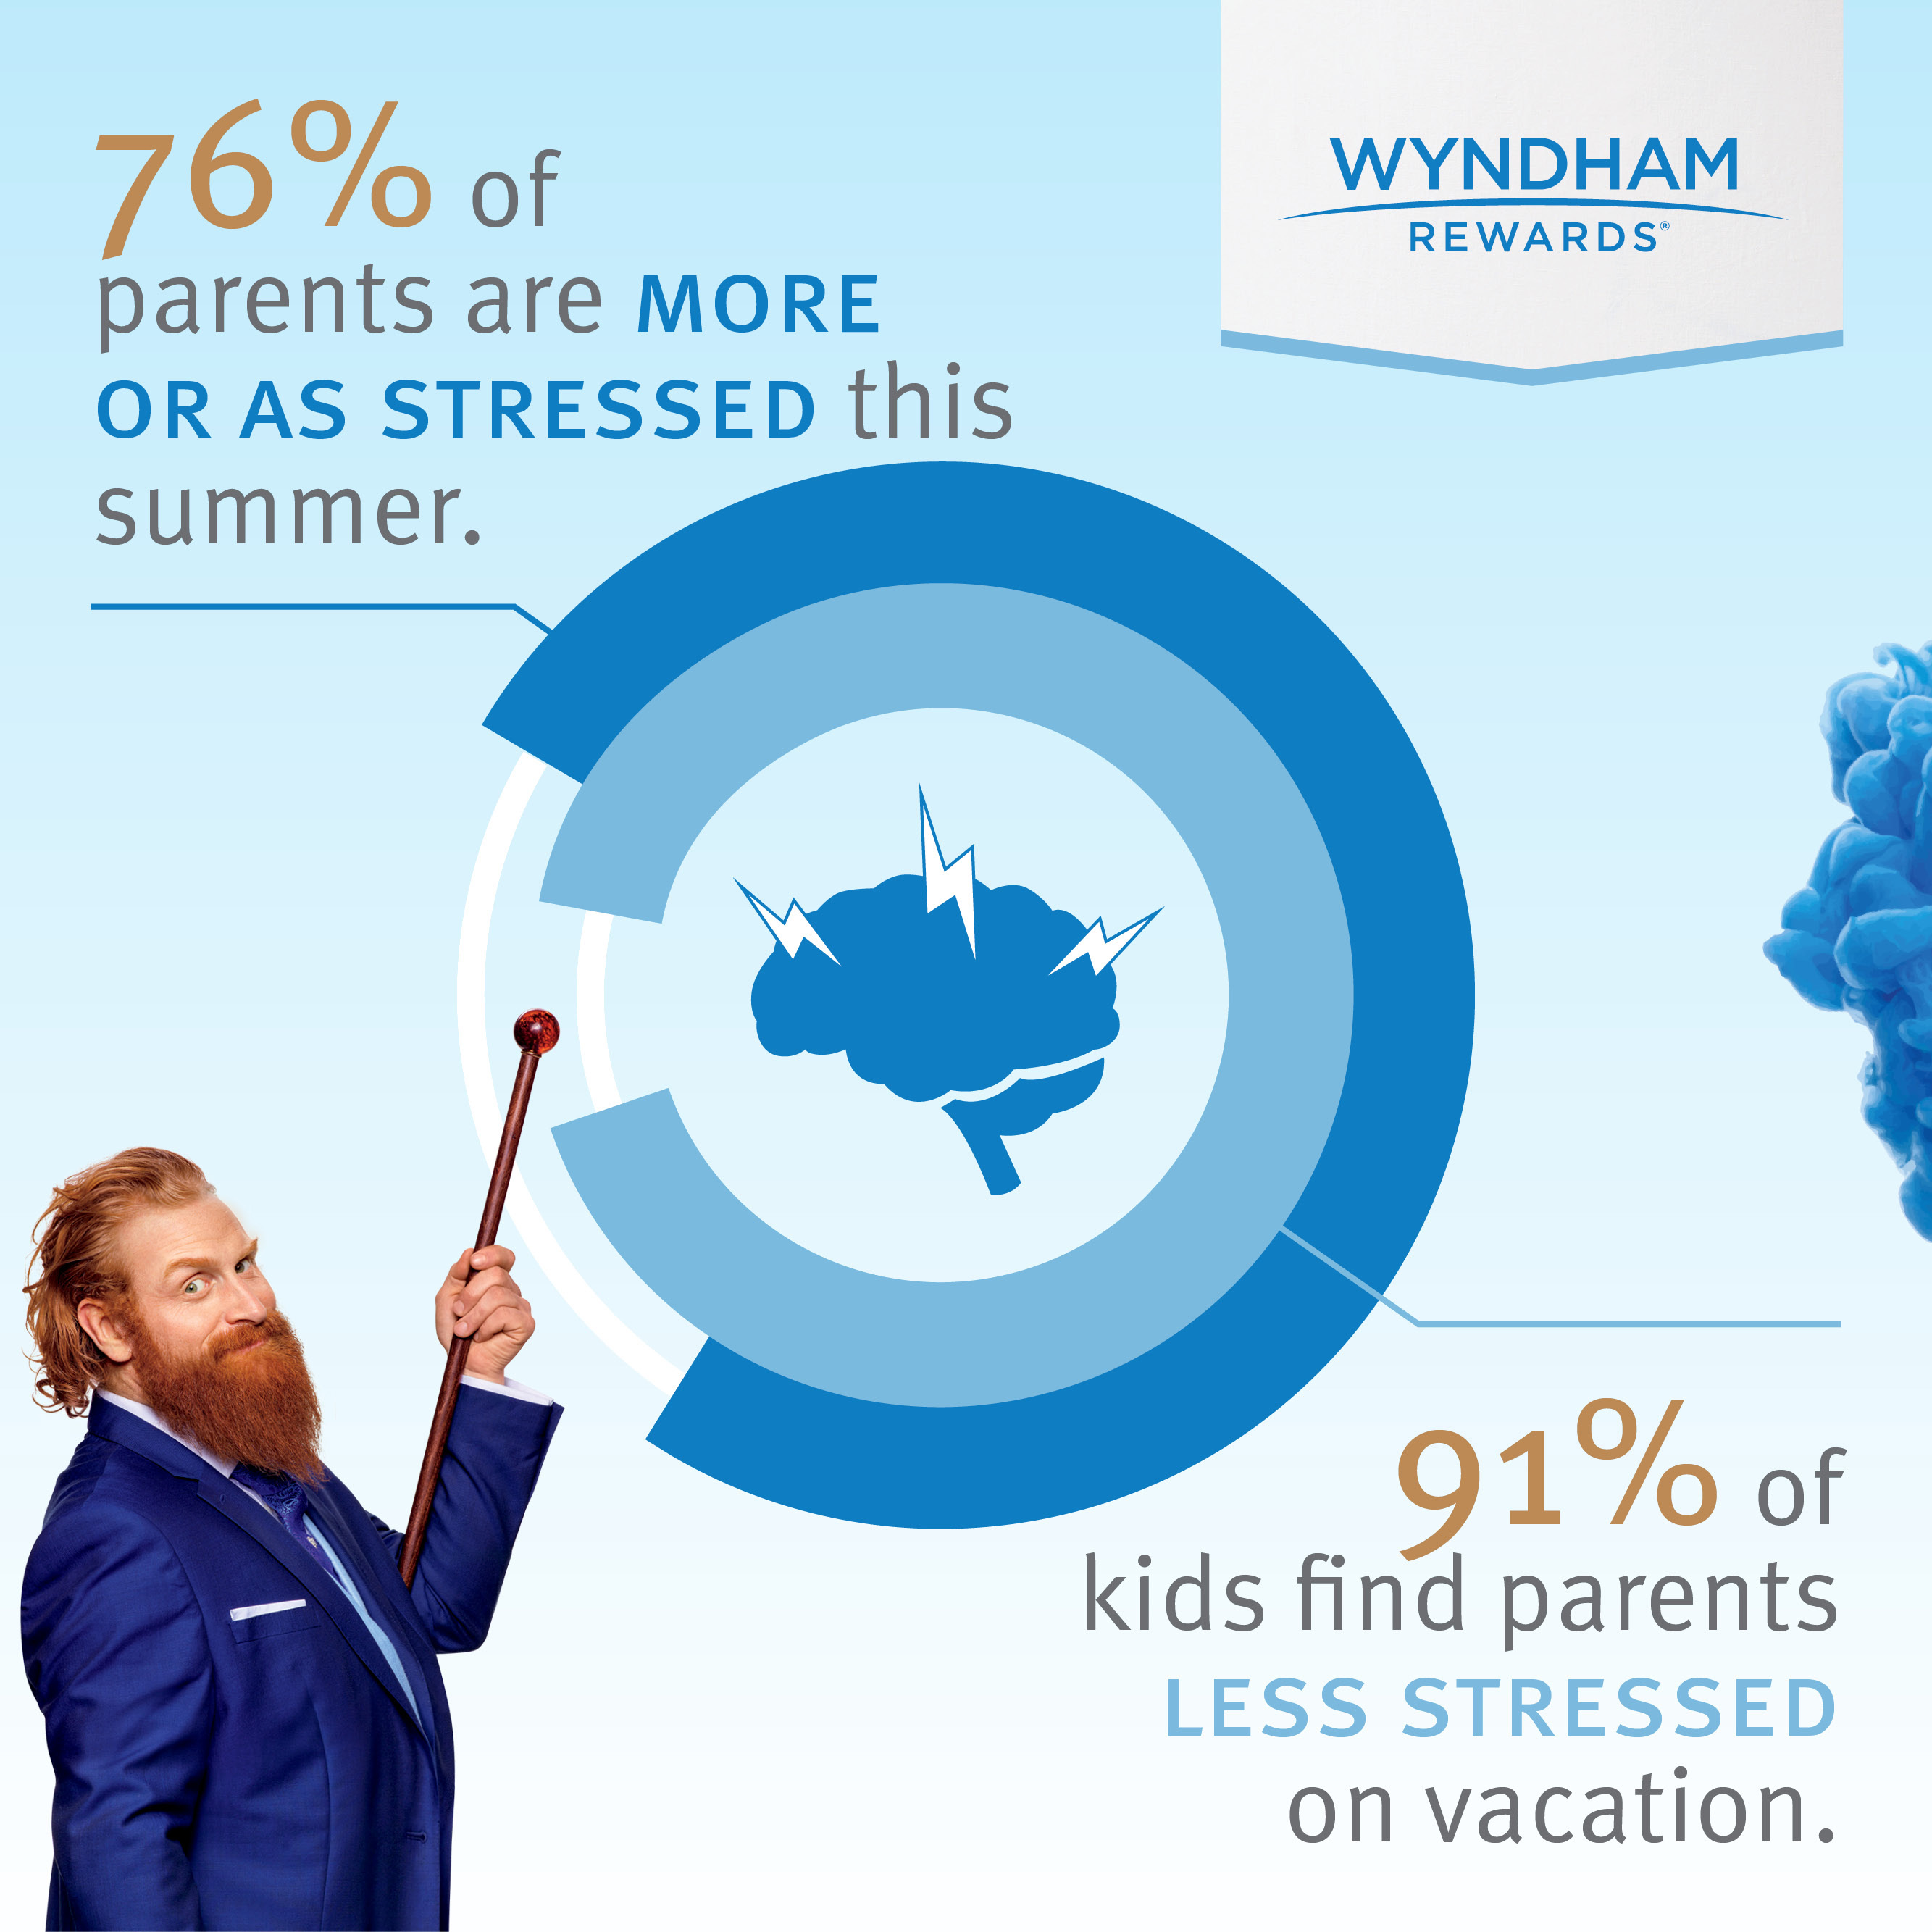 A new national survey by Wyndham Rewards found that 91% of kids believe that parents are more relaxed/less stressed while on vacation. 